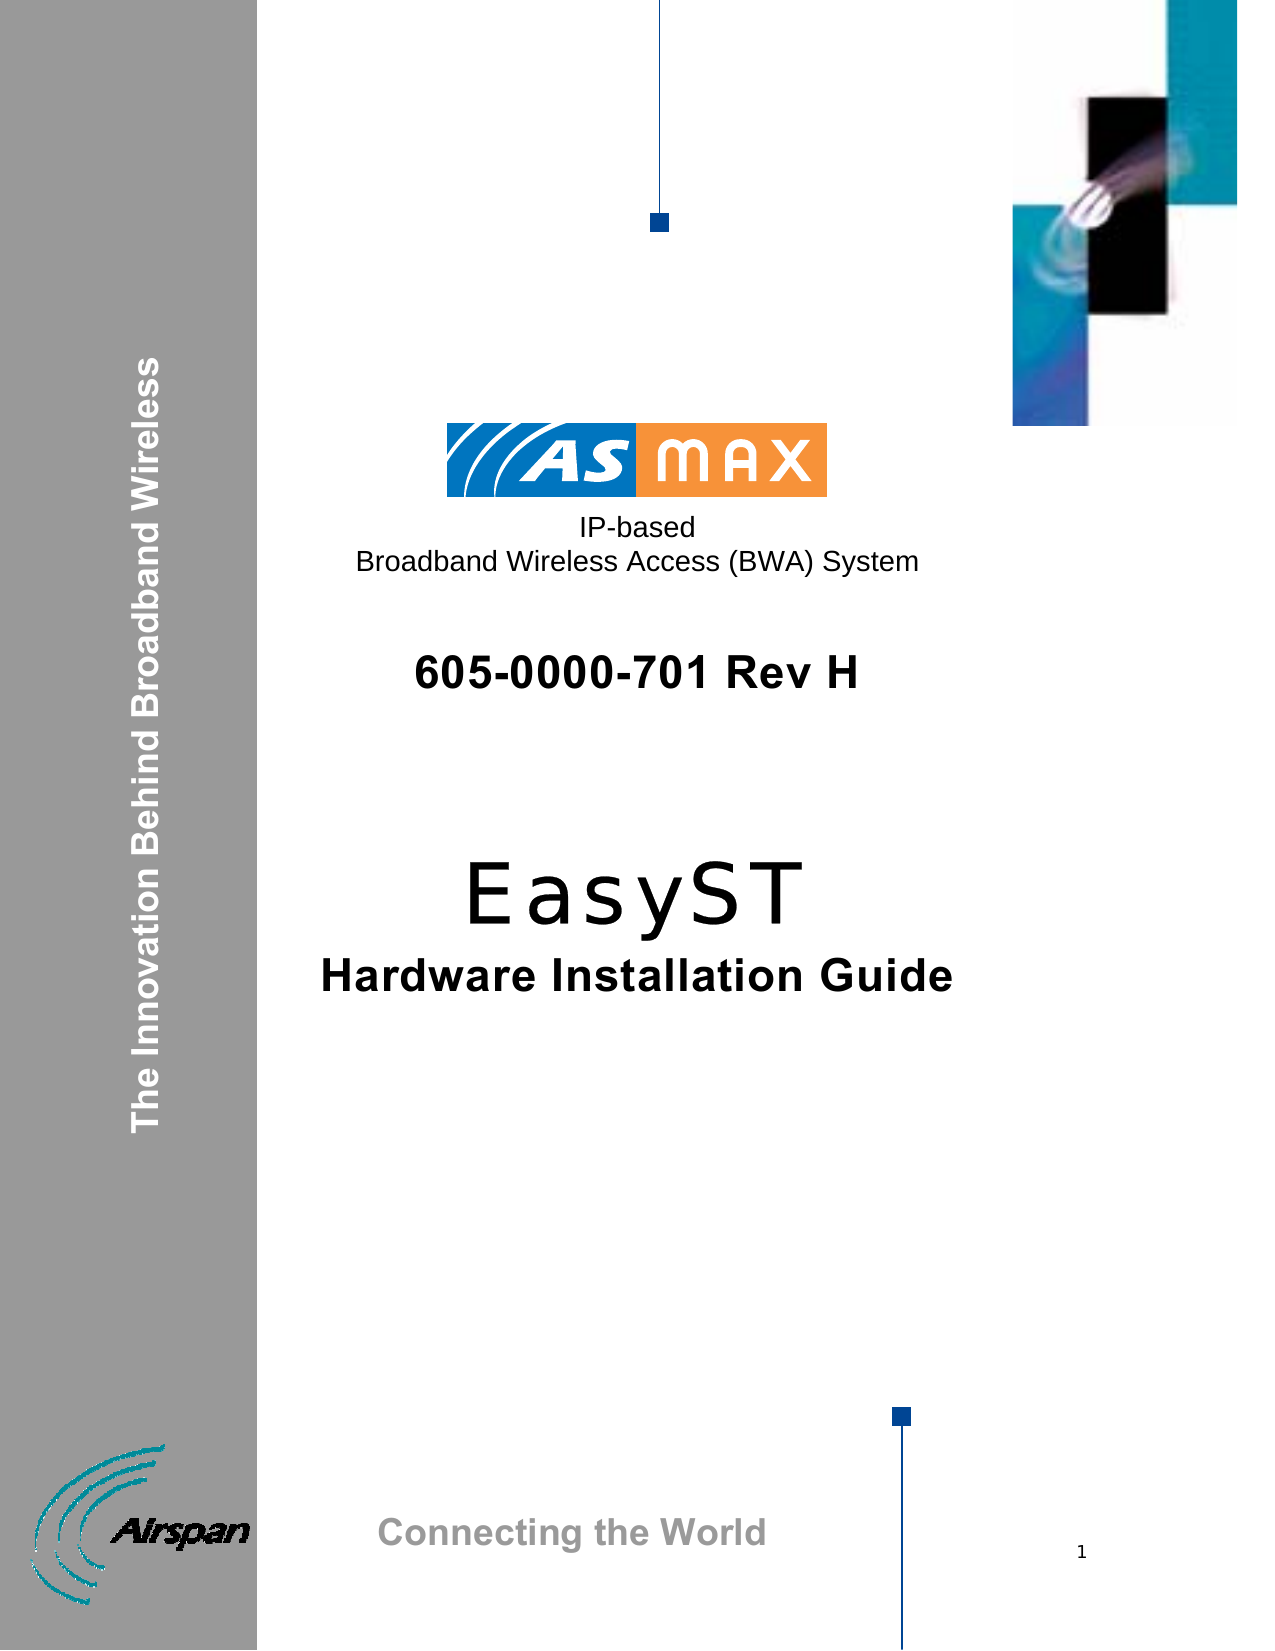 1           IP-based  Broadband Wireless Access (BWA) System   605-0000-701 Rev H    EasyST Hardware Installation Guide                                      The Innovation Behind Broadband Wireless Connecting the World 